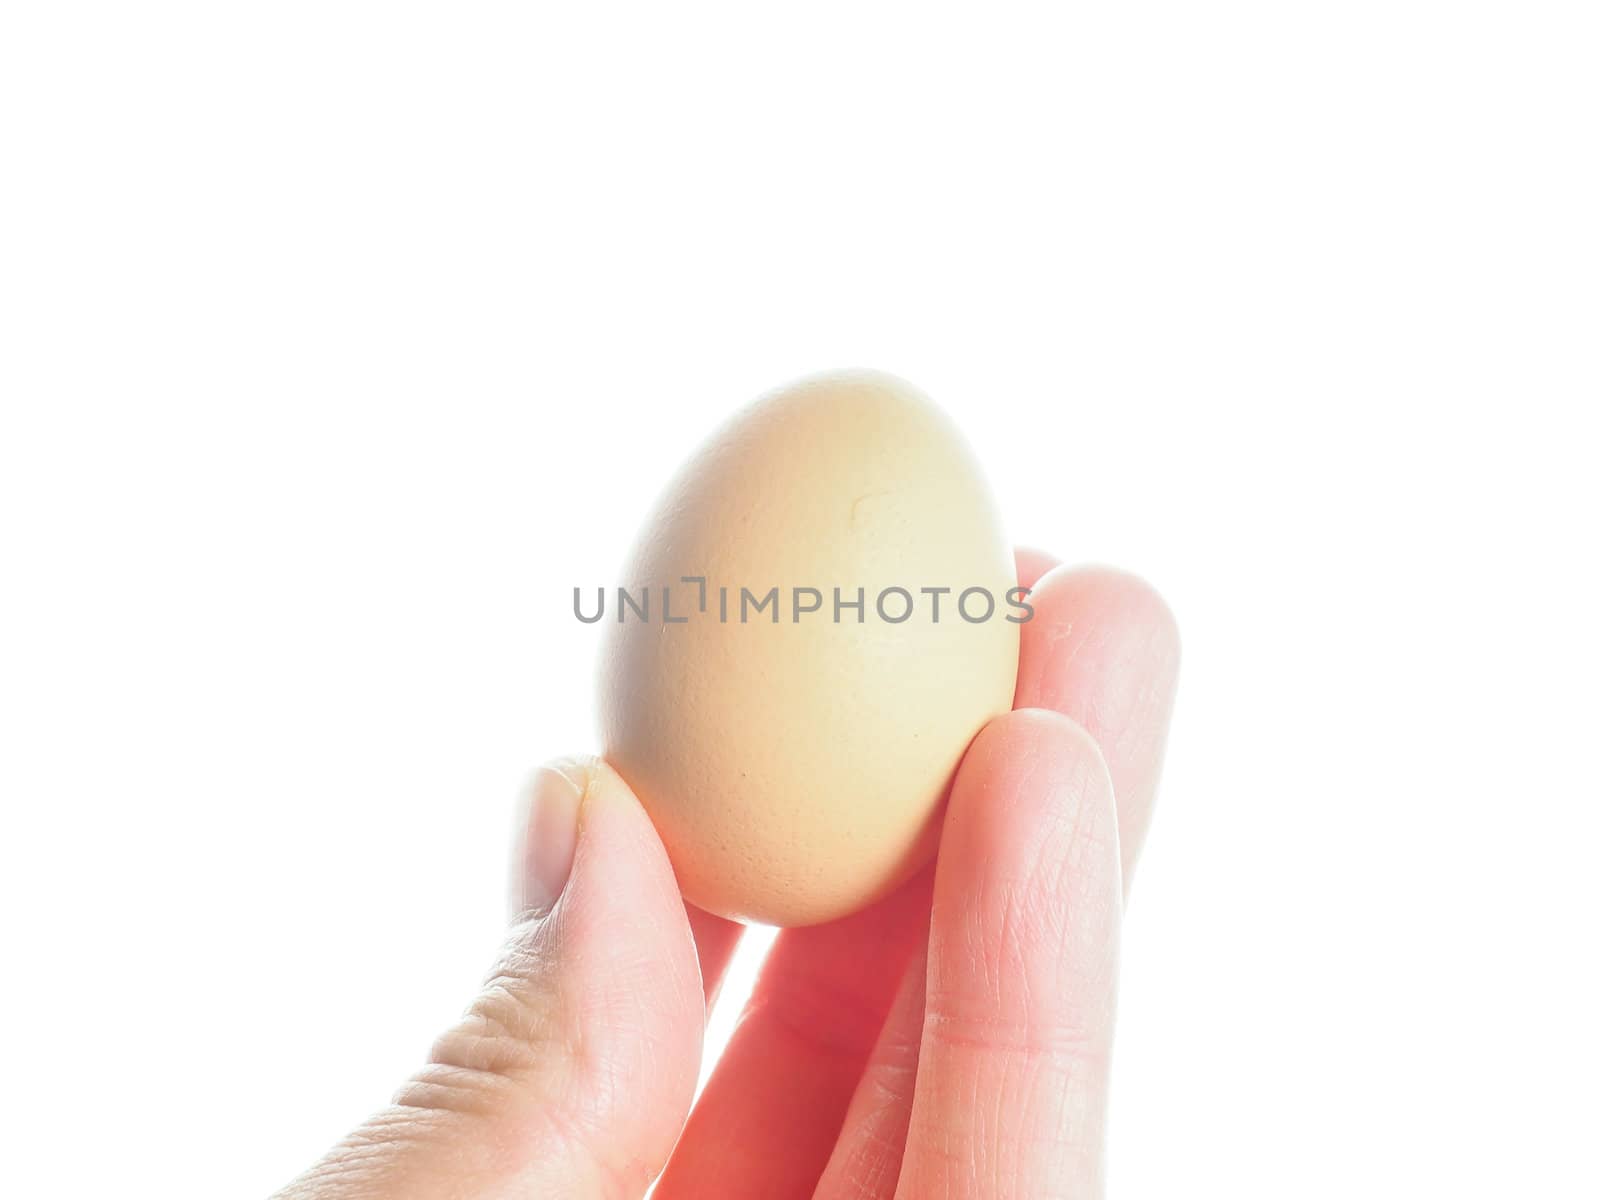 Closeup on farmed brown chicken egg held up by fingers towards w by Arvebettum